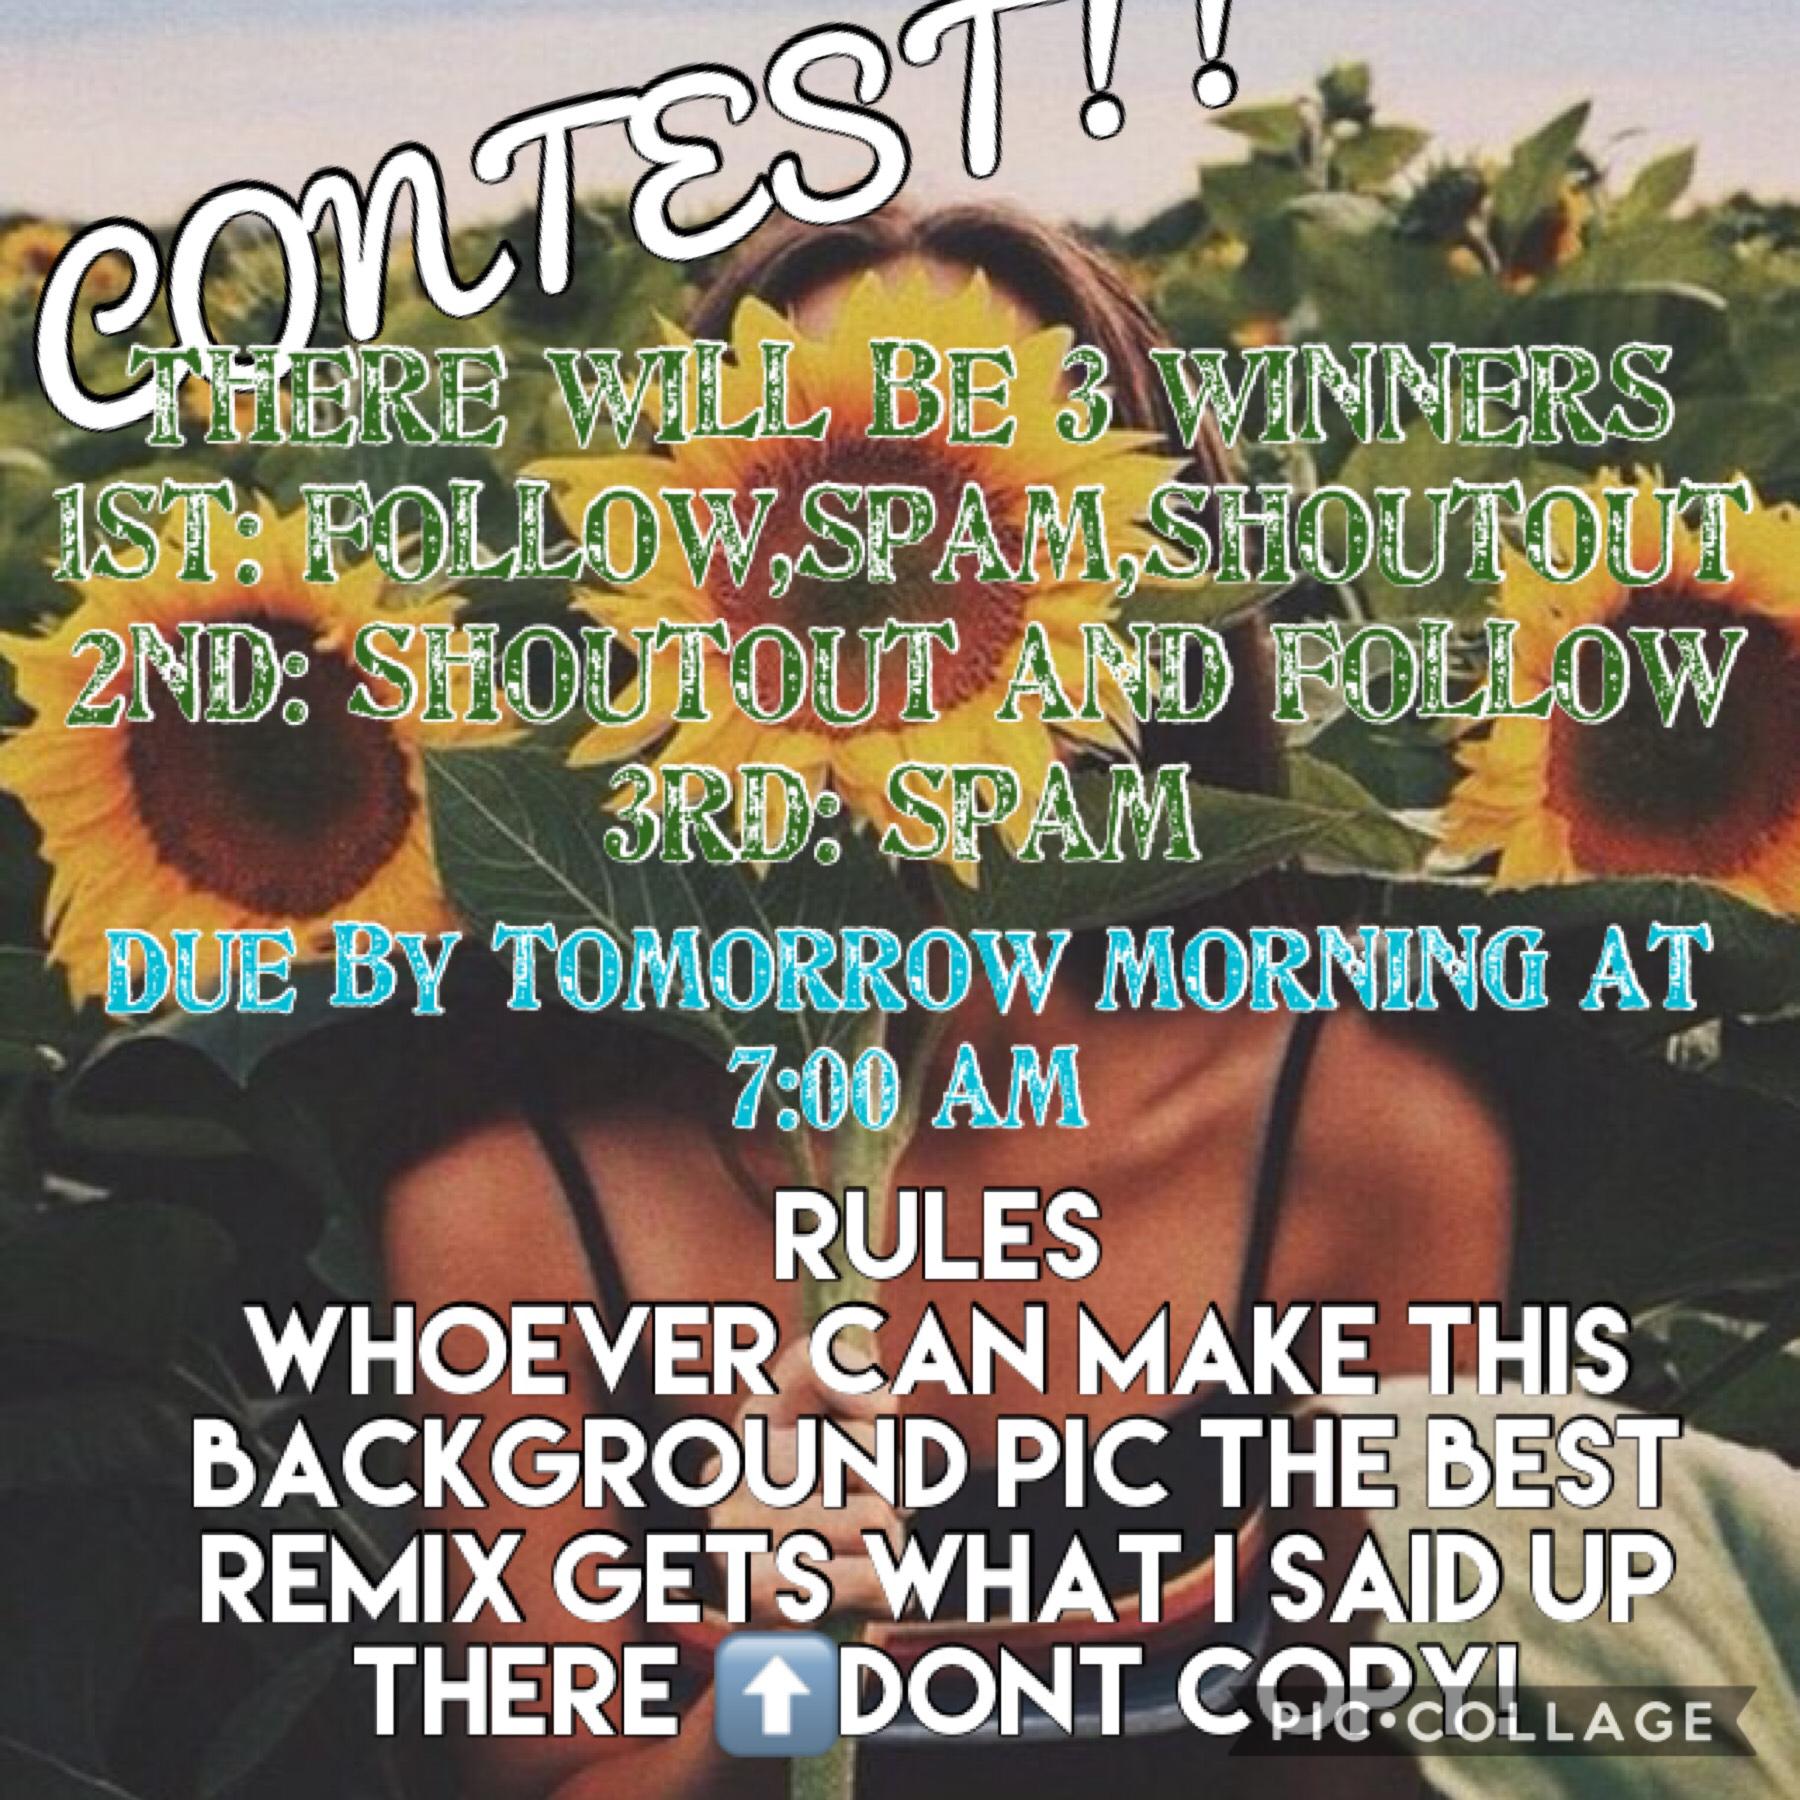 Also I will be doing a contest every Sunday so be ready!❤️❤️💛💛💛🌻🌻